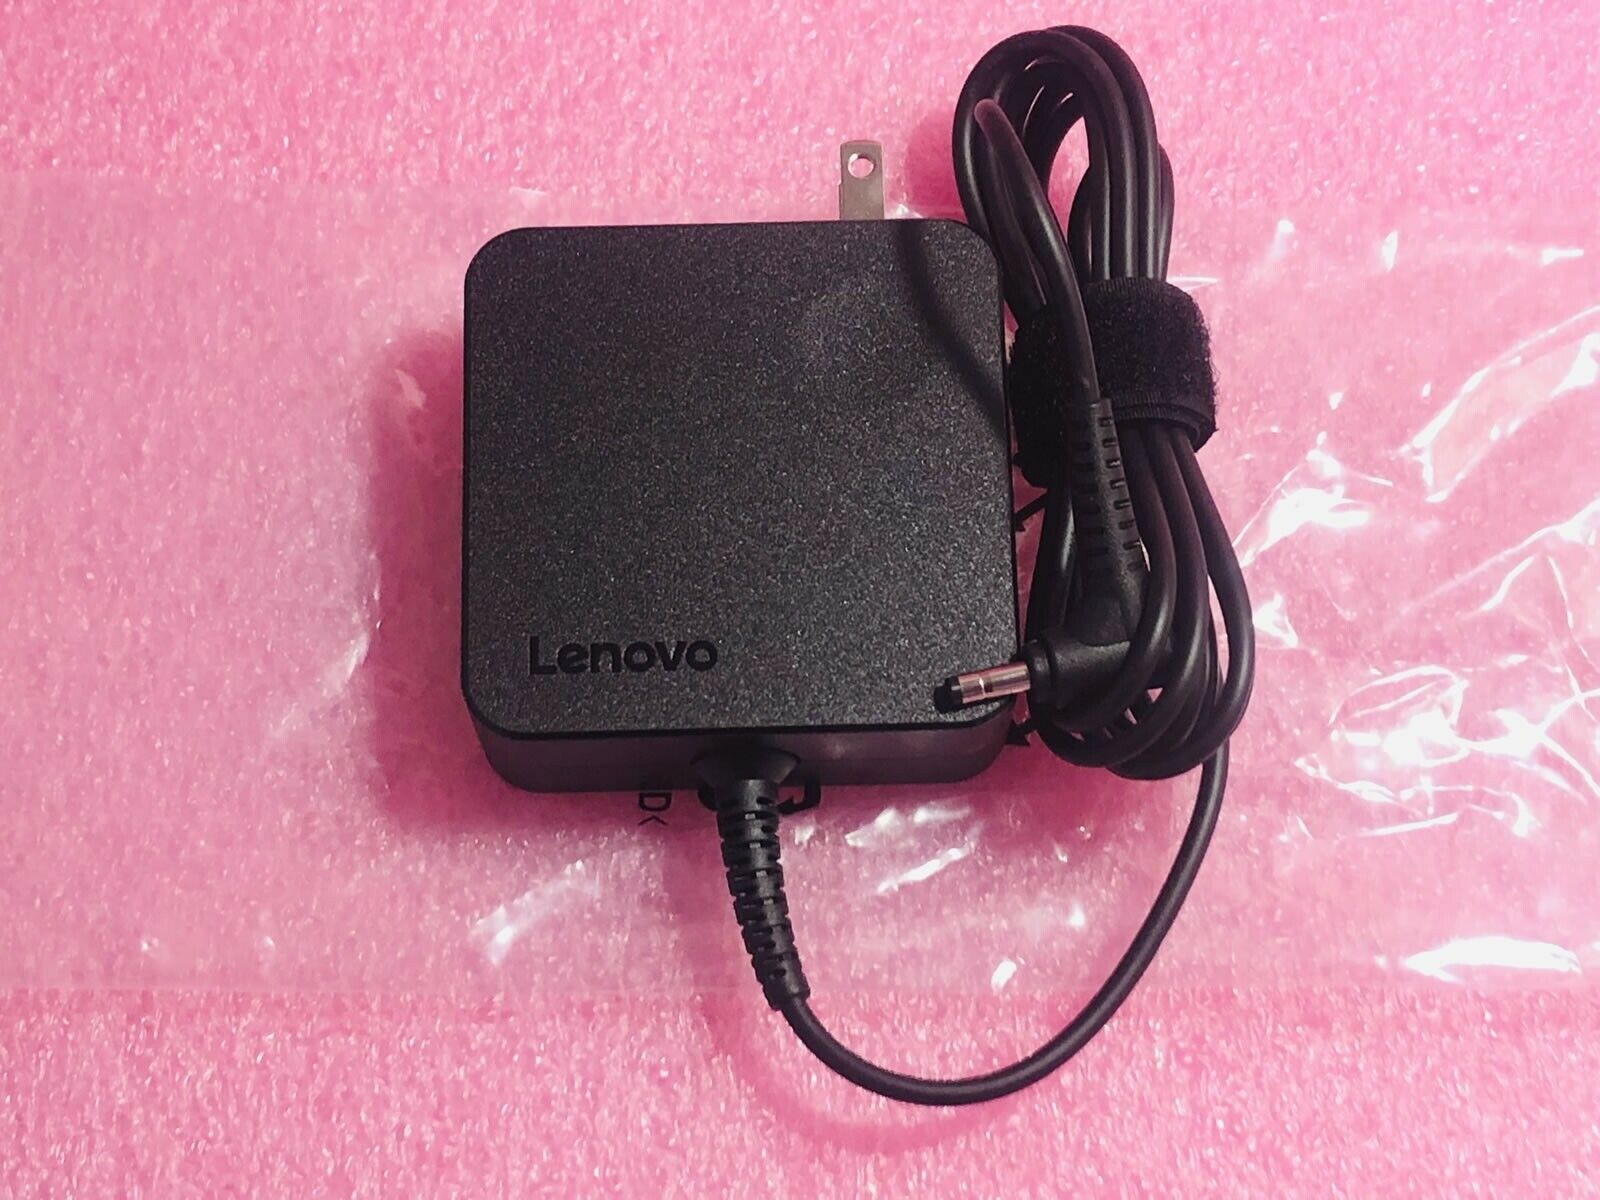 Genuine Lenovo 65W AC Power Laptop Charger Adapter IdeaPad S340 81N8005DUS Brand: Lenovo Type: Power Adapter Compat